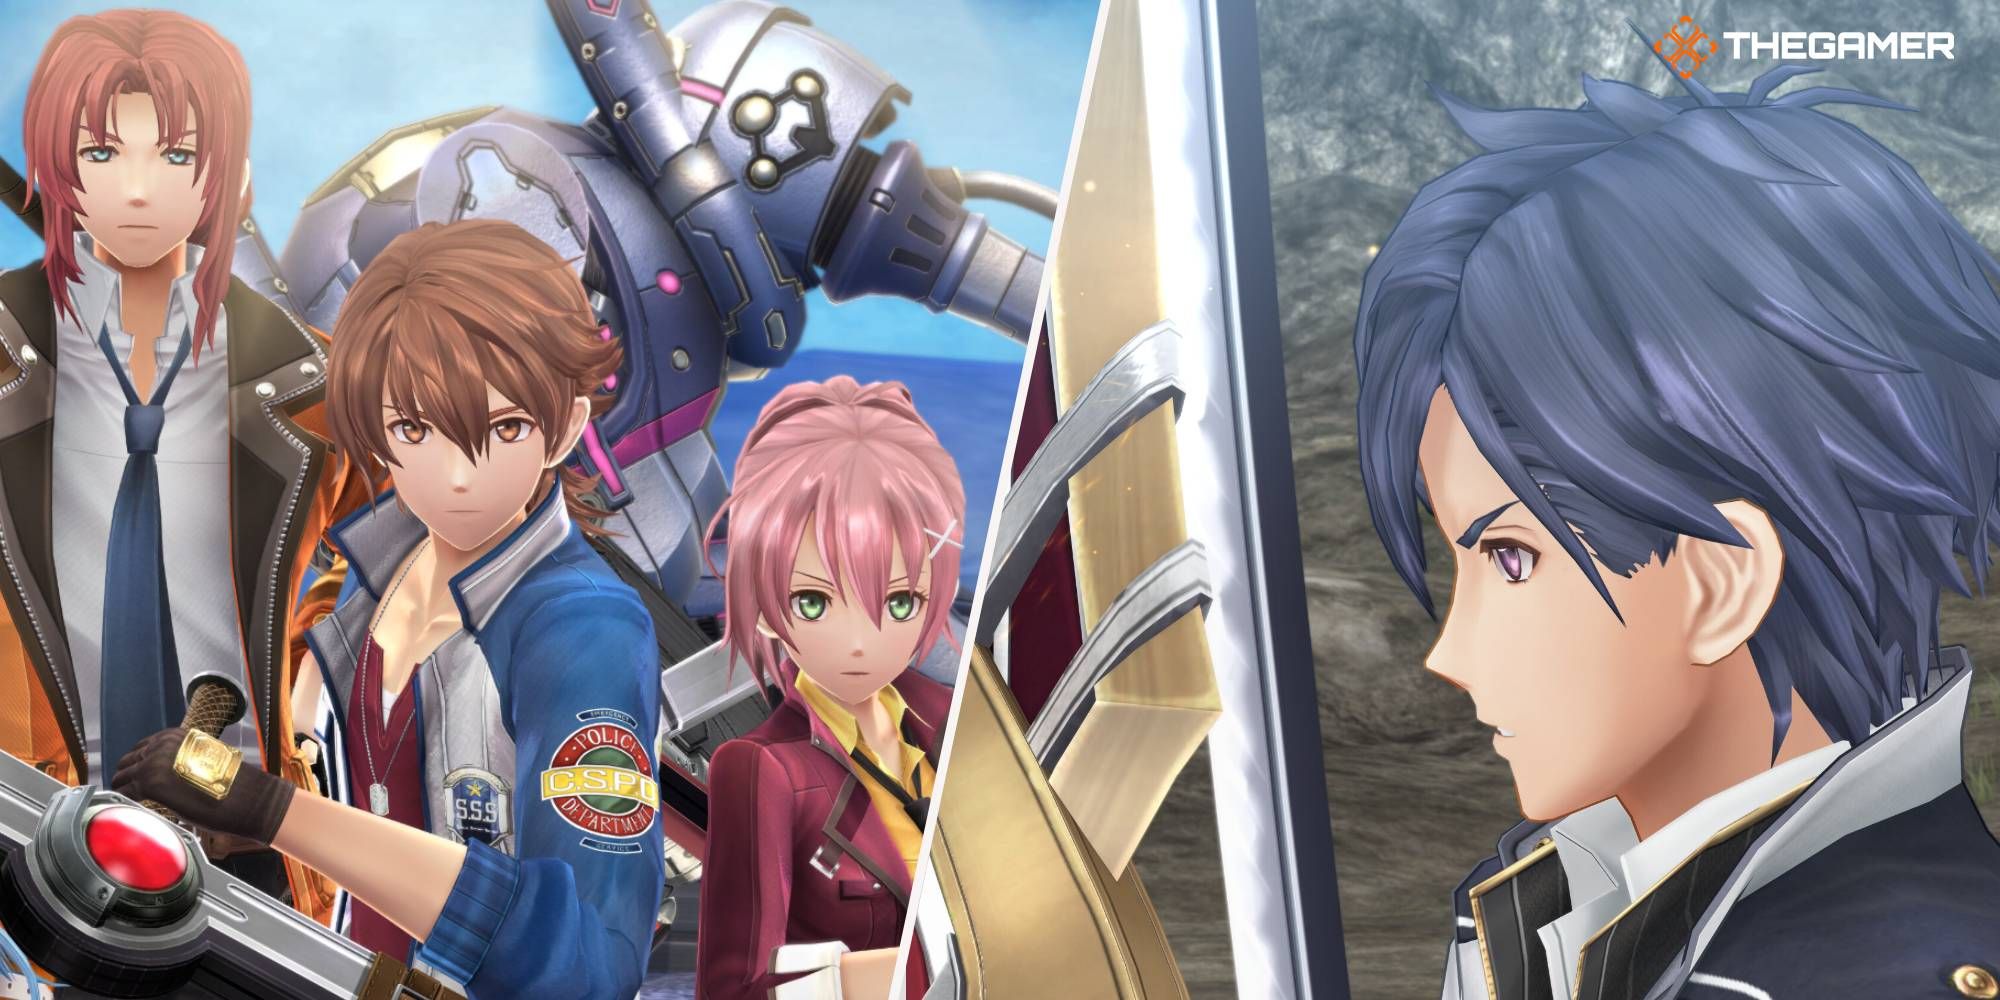 Lloyd and teammates stand ready for combat and Rean participates in a duel in Trails into Reverie